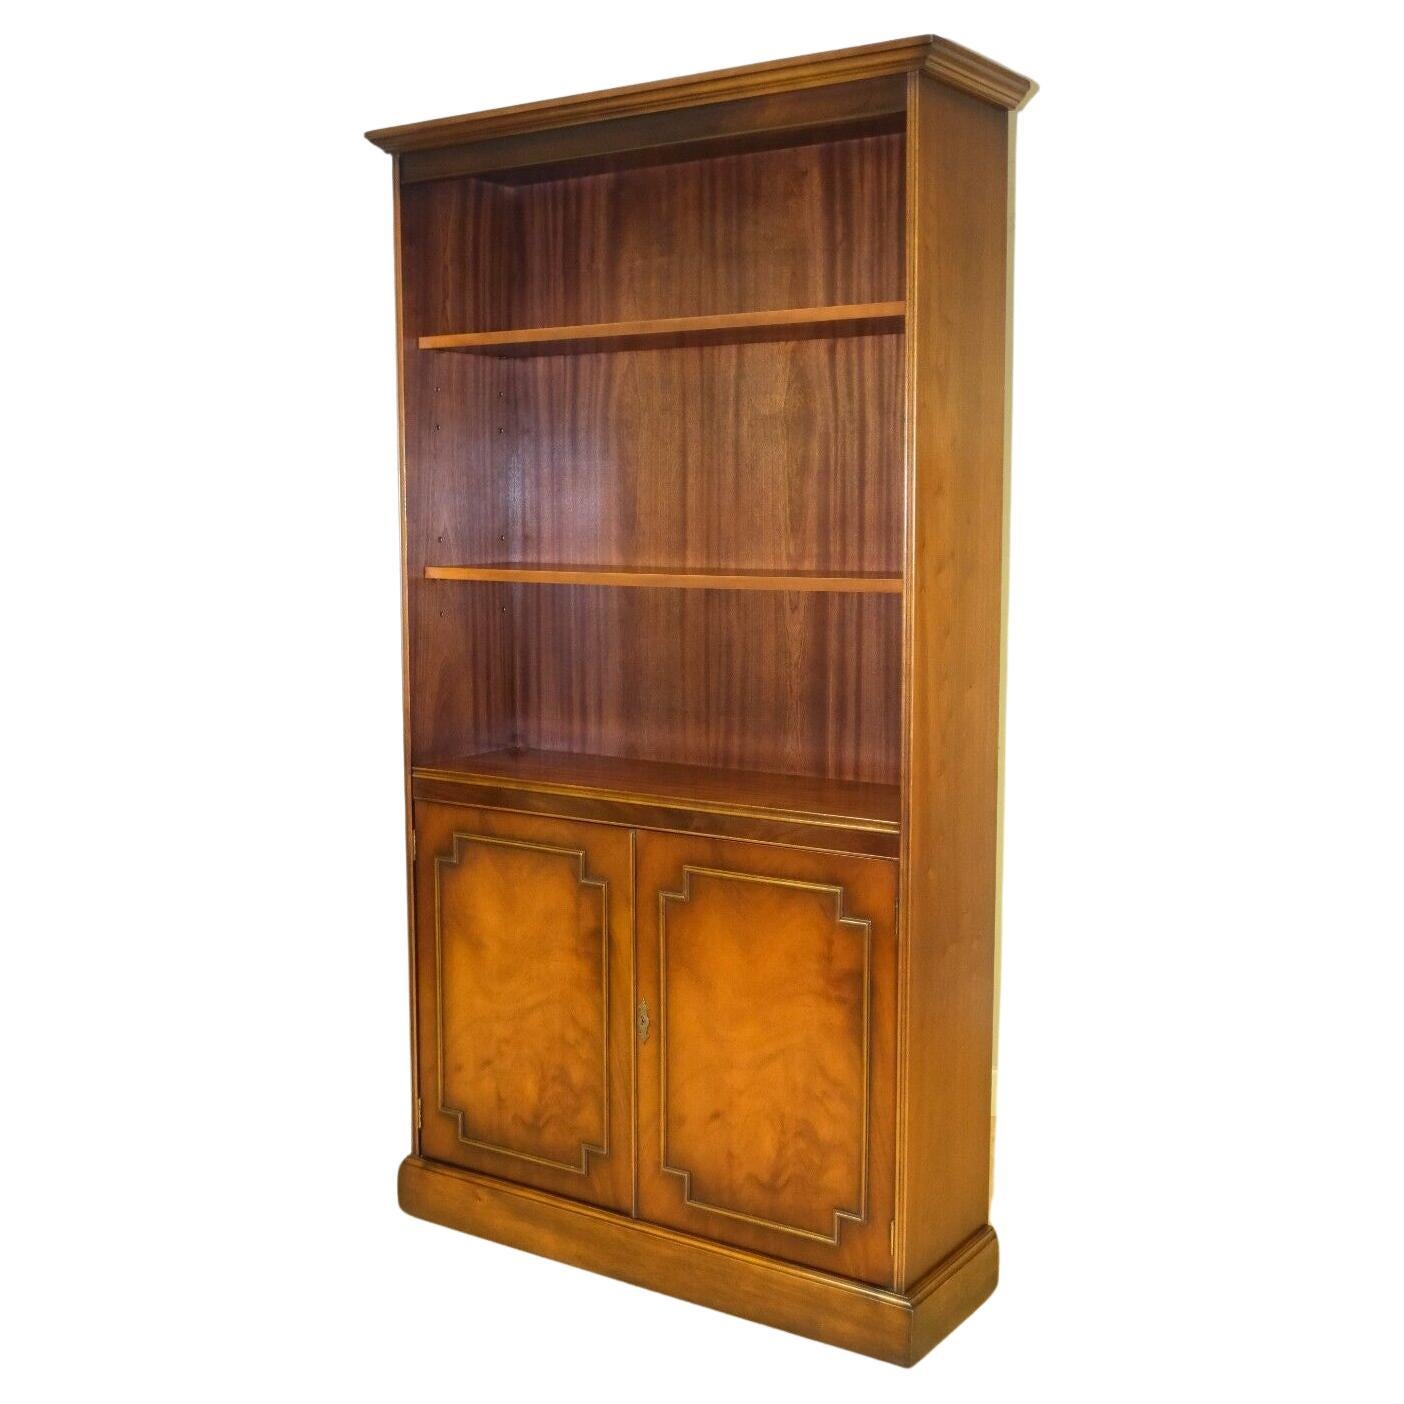 BRADLEY FURNITURE ENGLAND YEW WOOD OPEN LiBRARY BOOKCASE CUPBOARD BASE For Sale